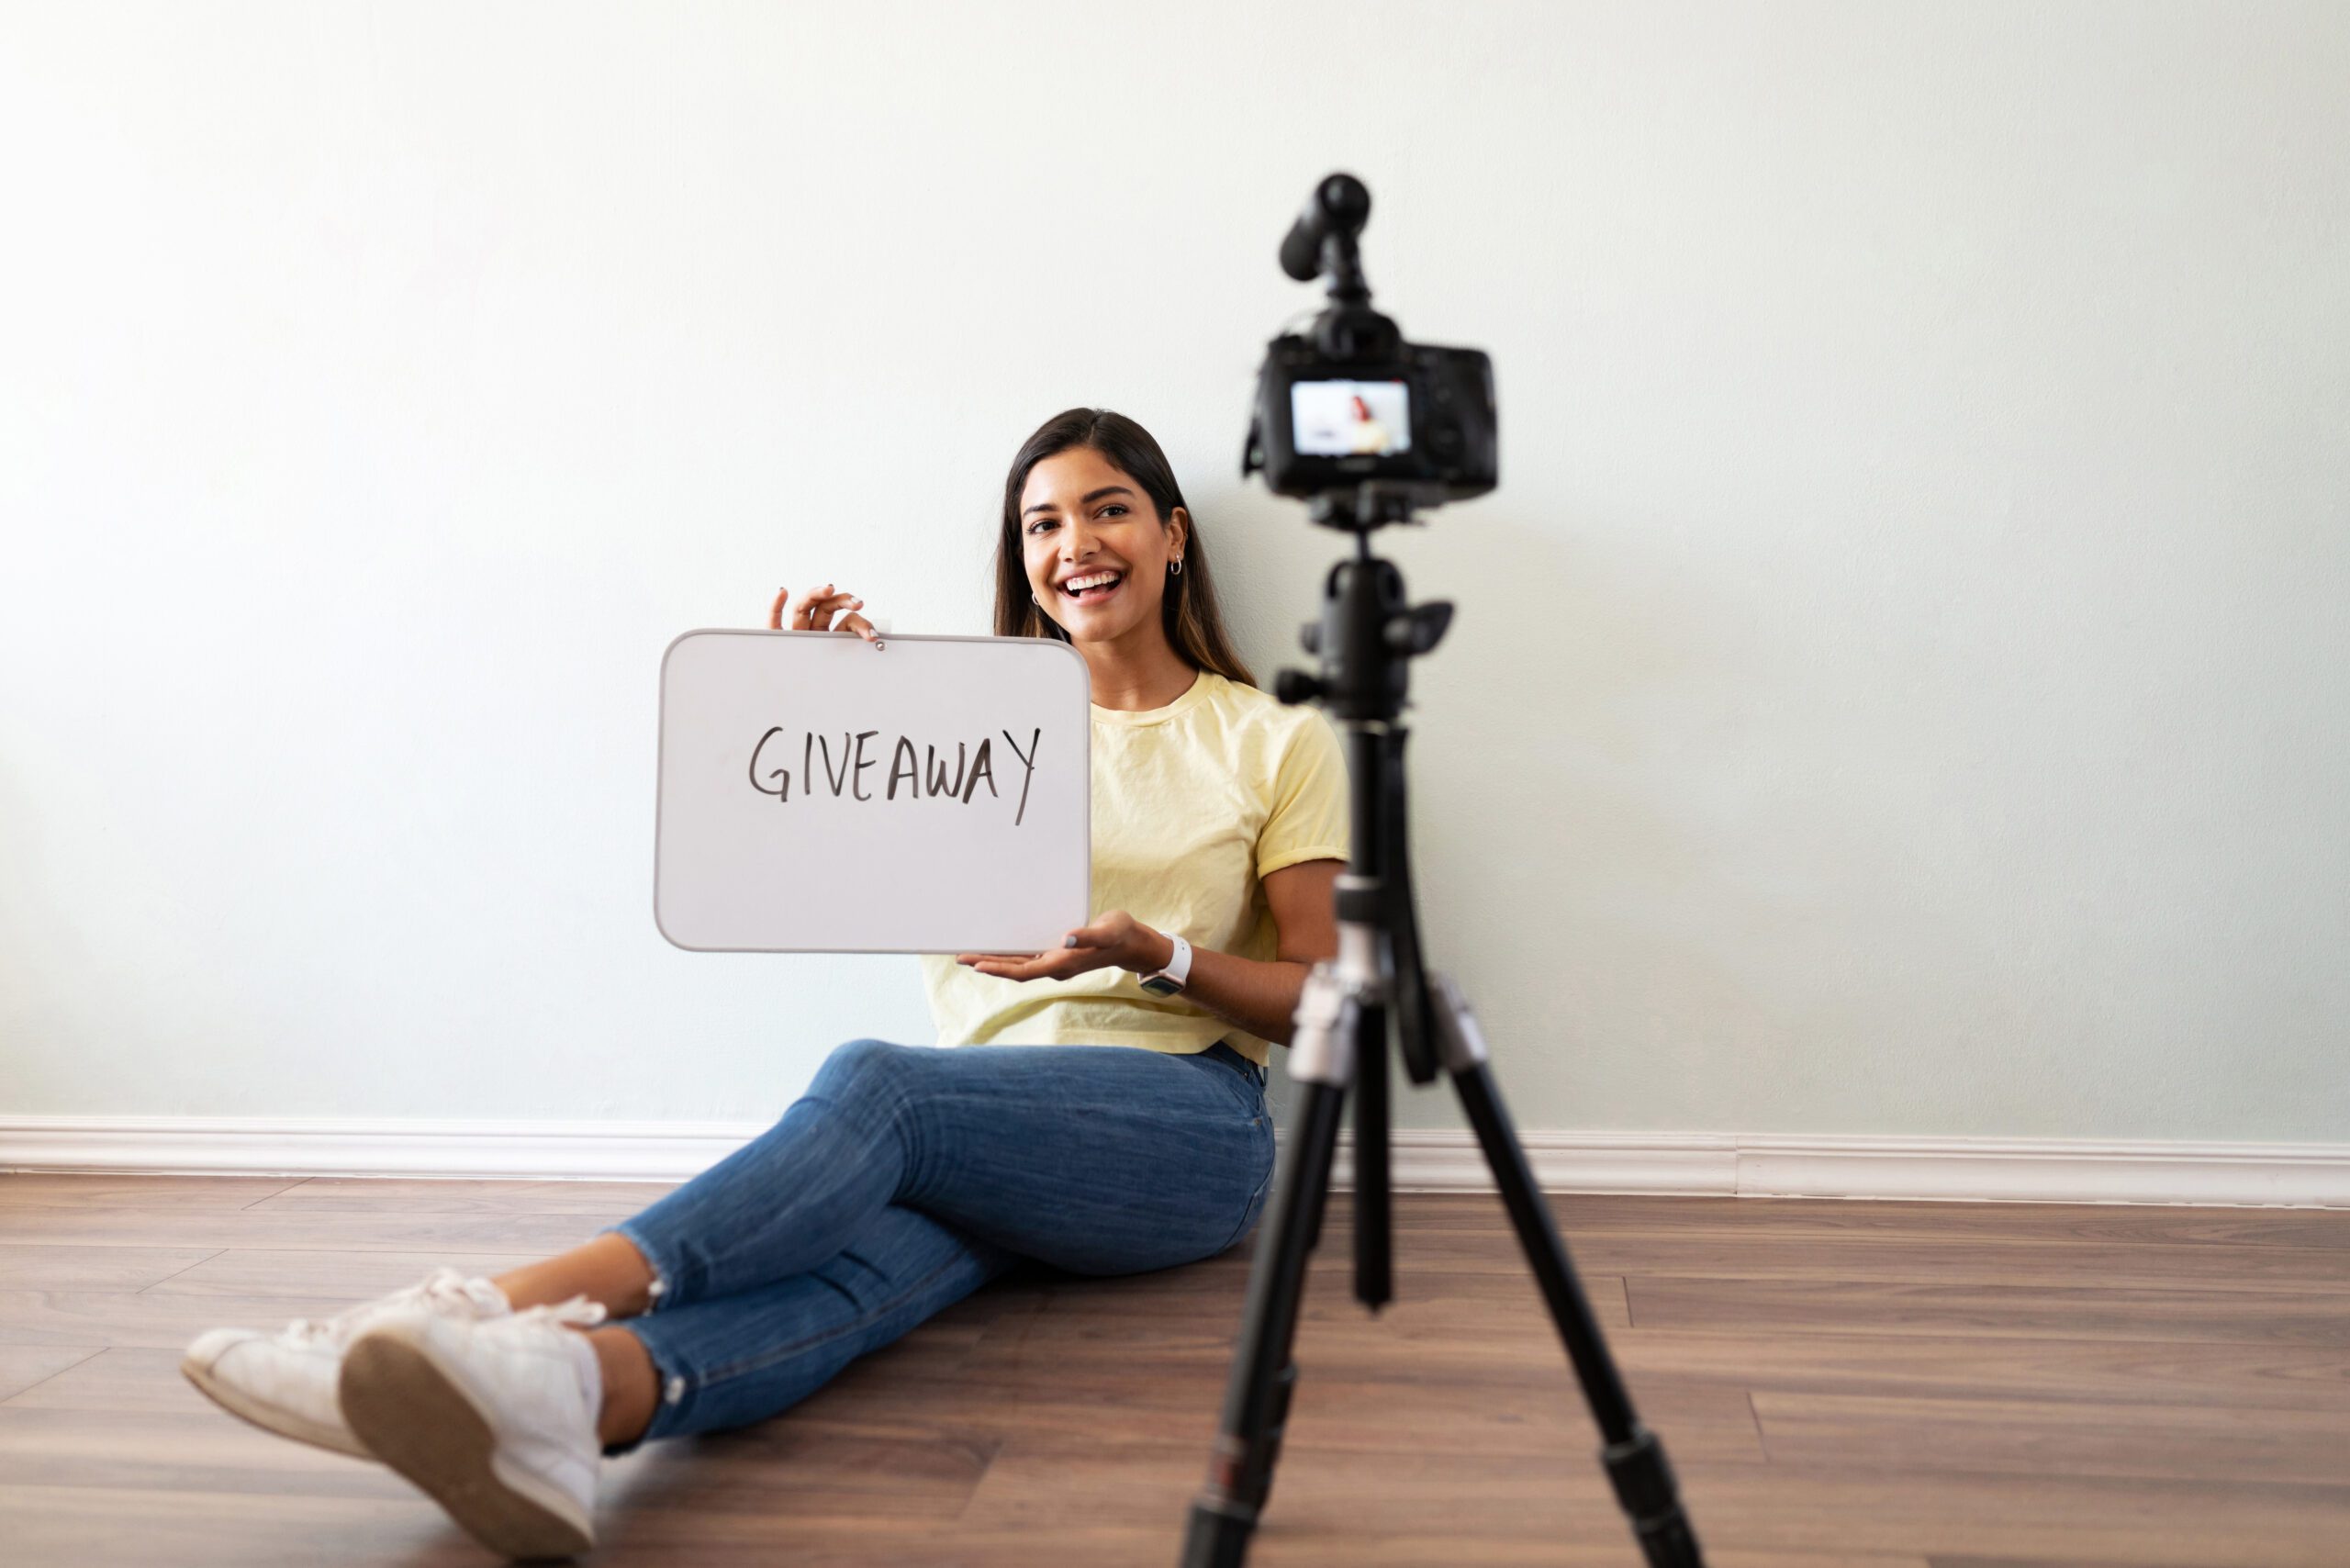 How to host an Instagram giveaway for your ecommerce business